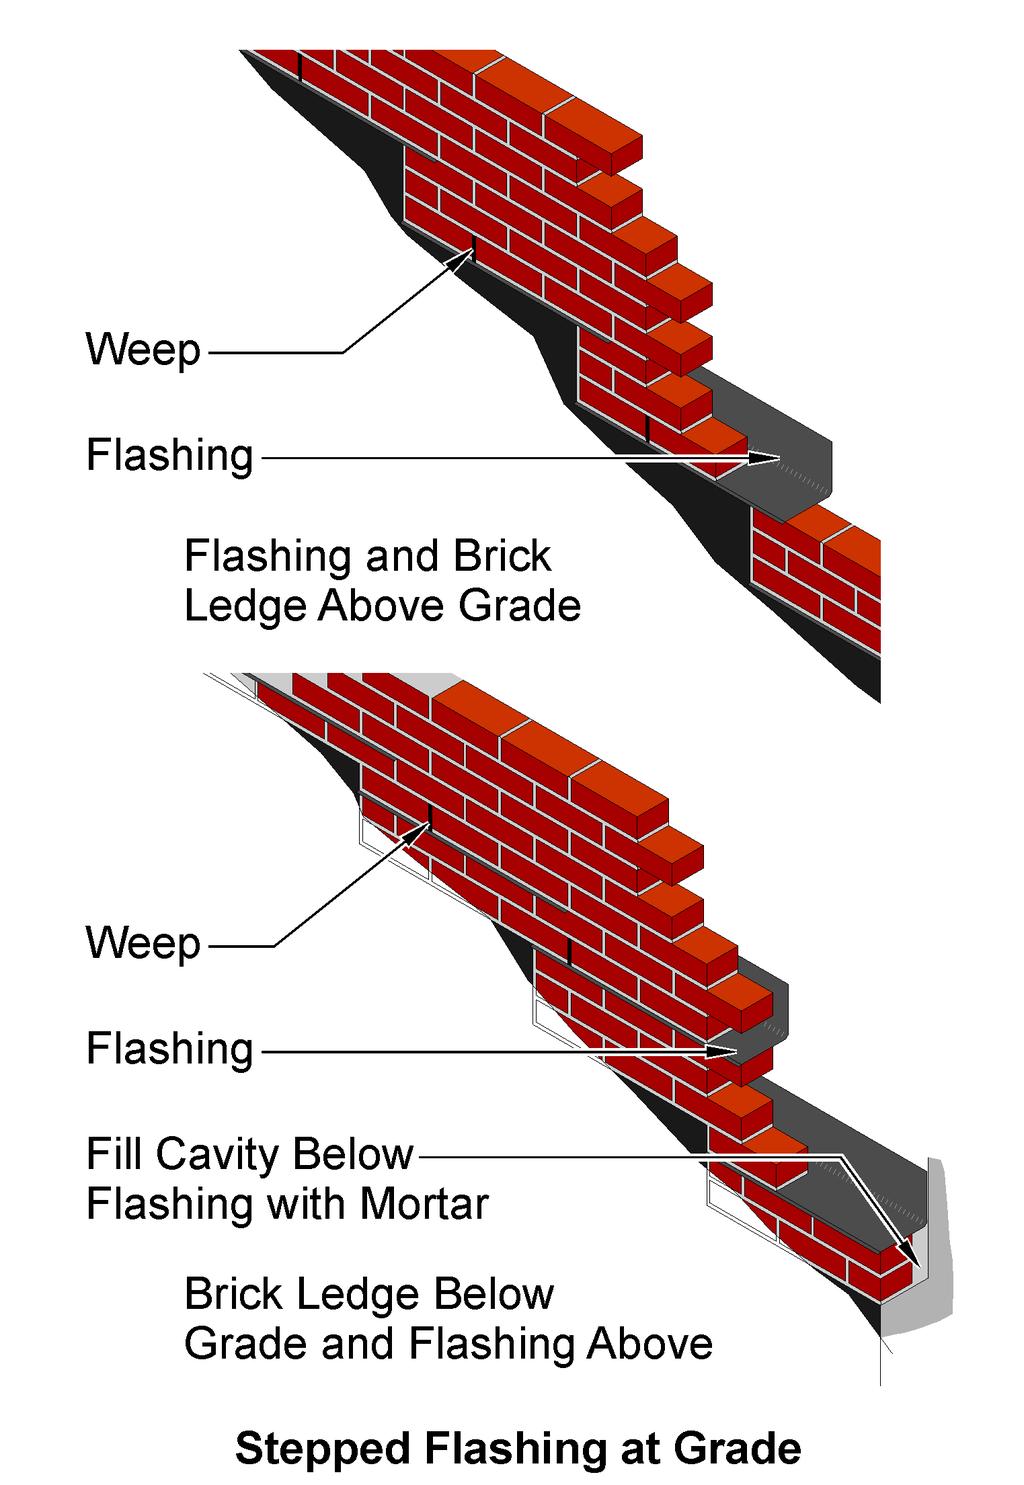 Frequently, brick is used in combination with other cladding materials on the same facade, some of which may be barrier-style systems or have drainage cavities that are smaller than those for brick